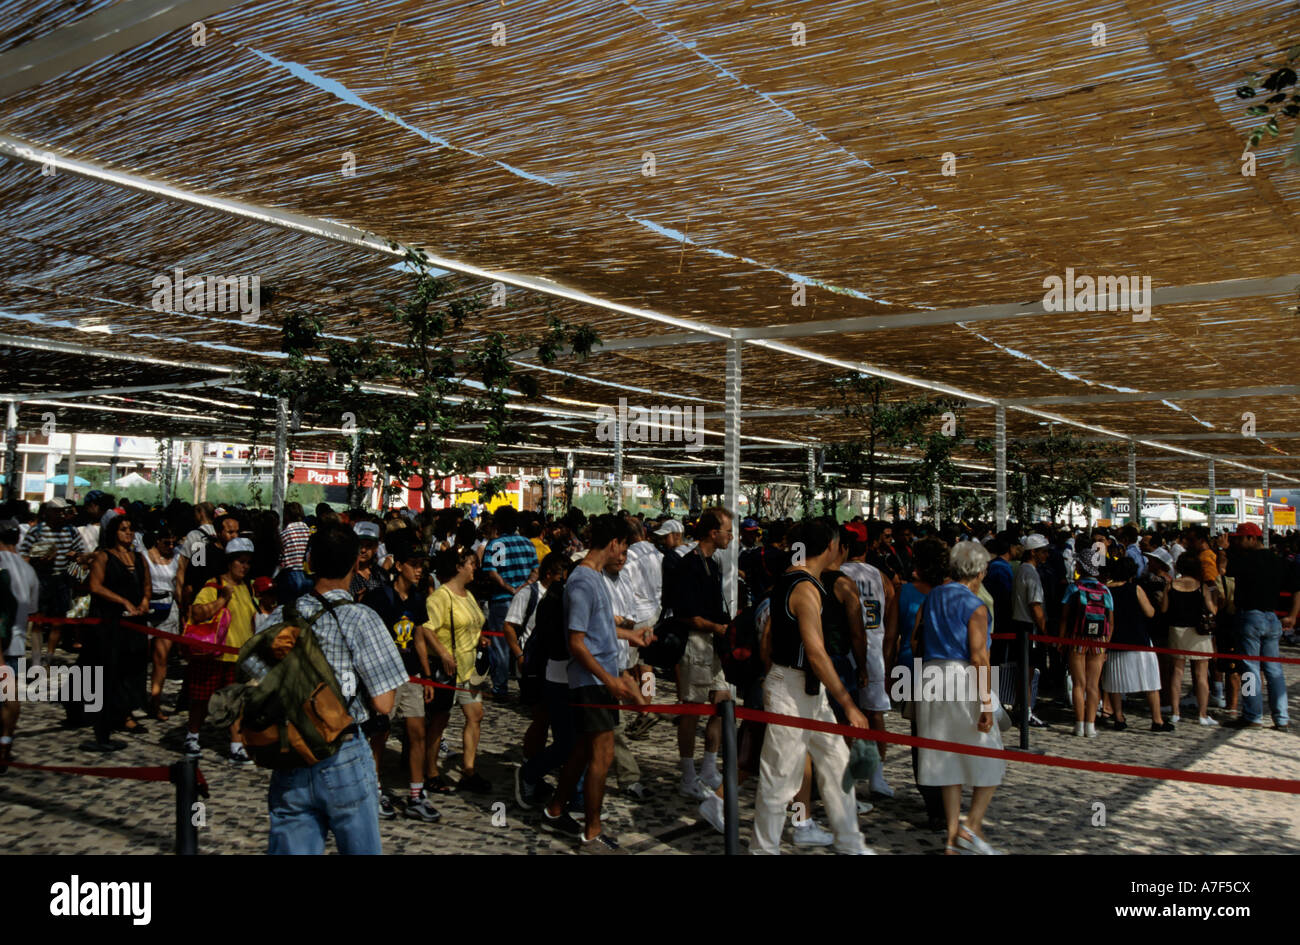 People in a line at Expo 98 Lisbon Portugal Stock Photo